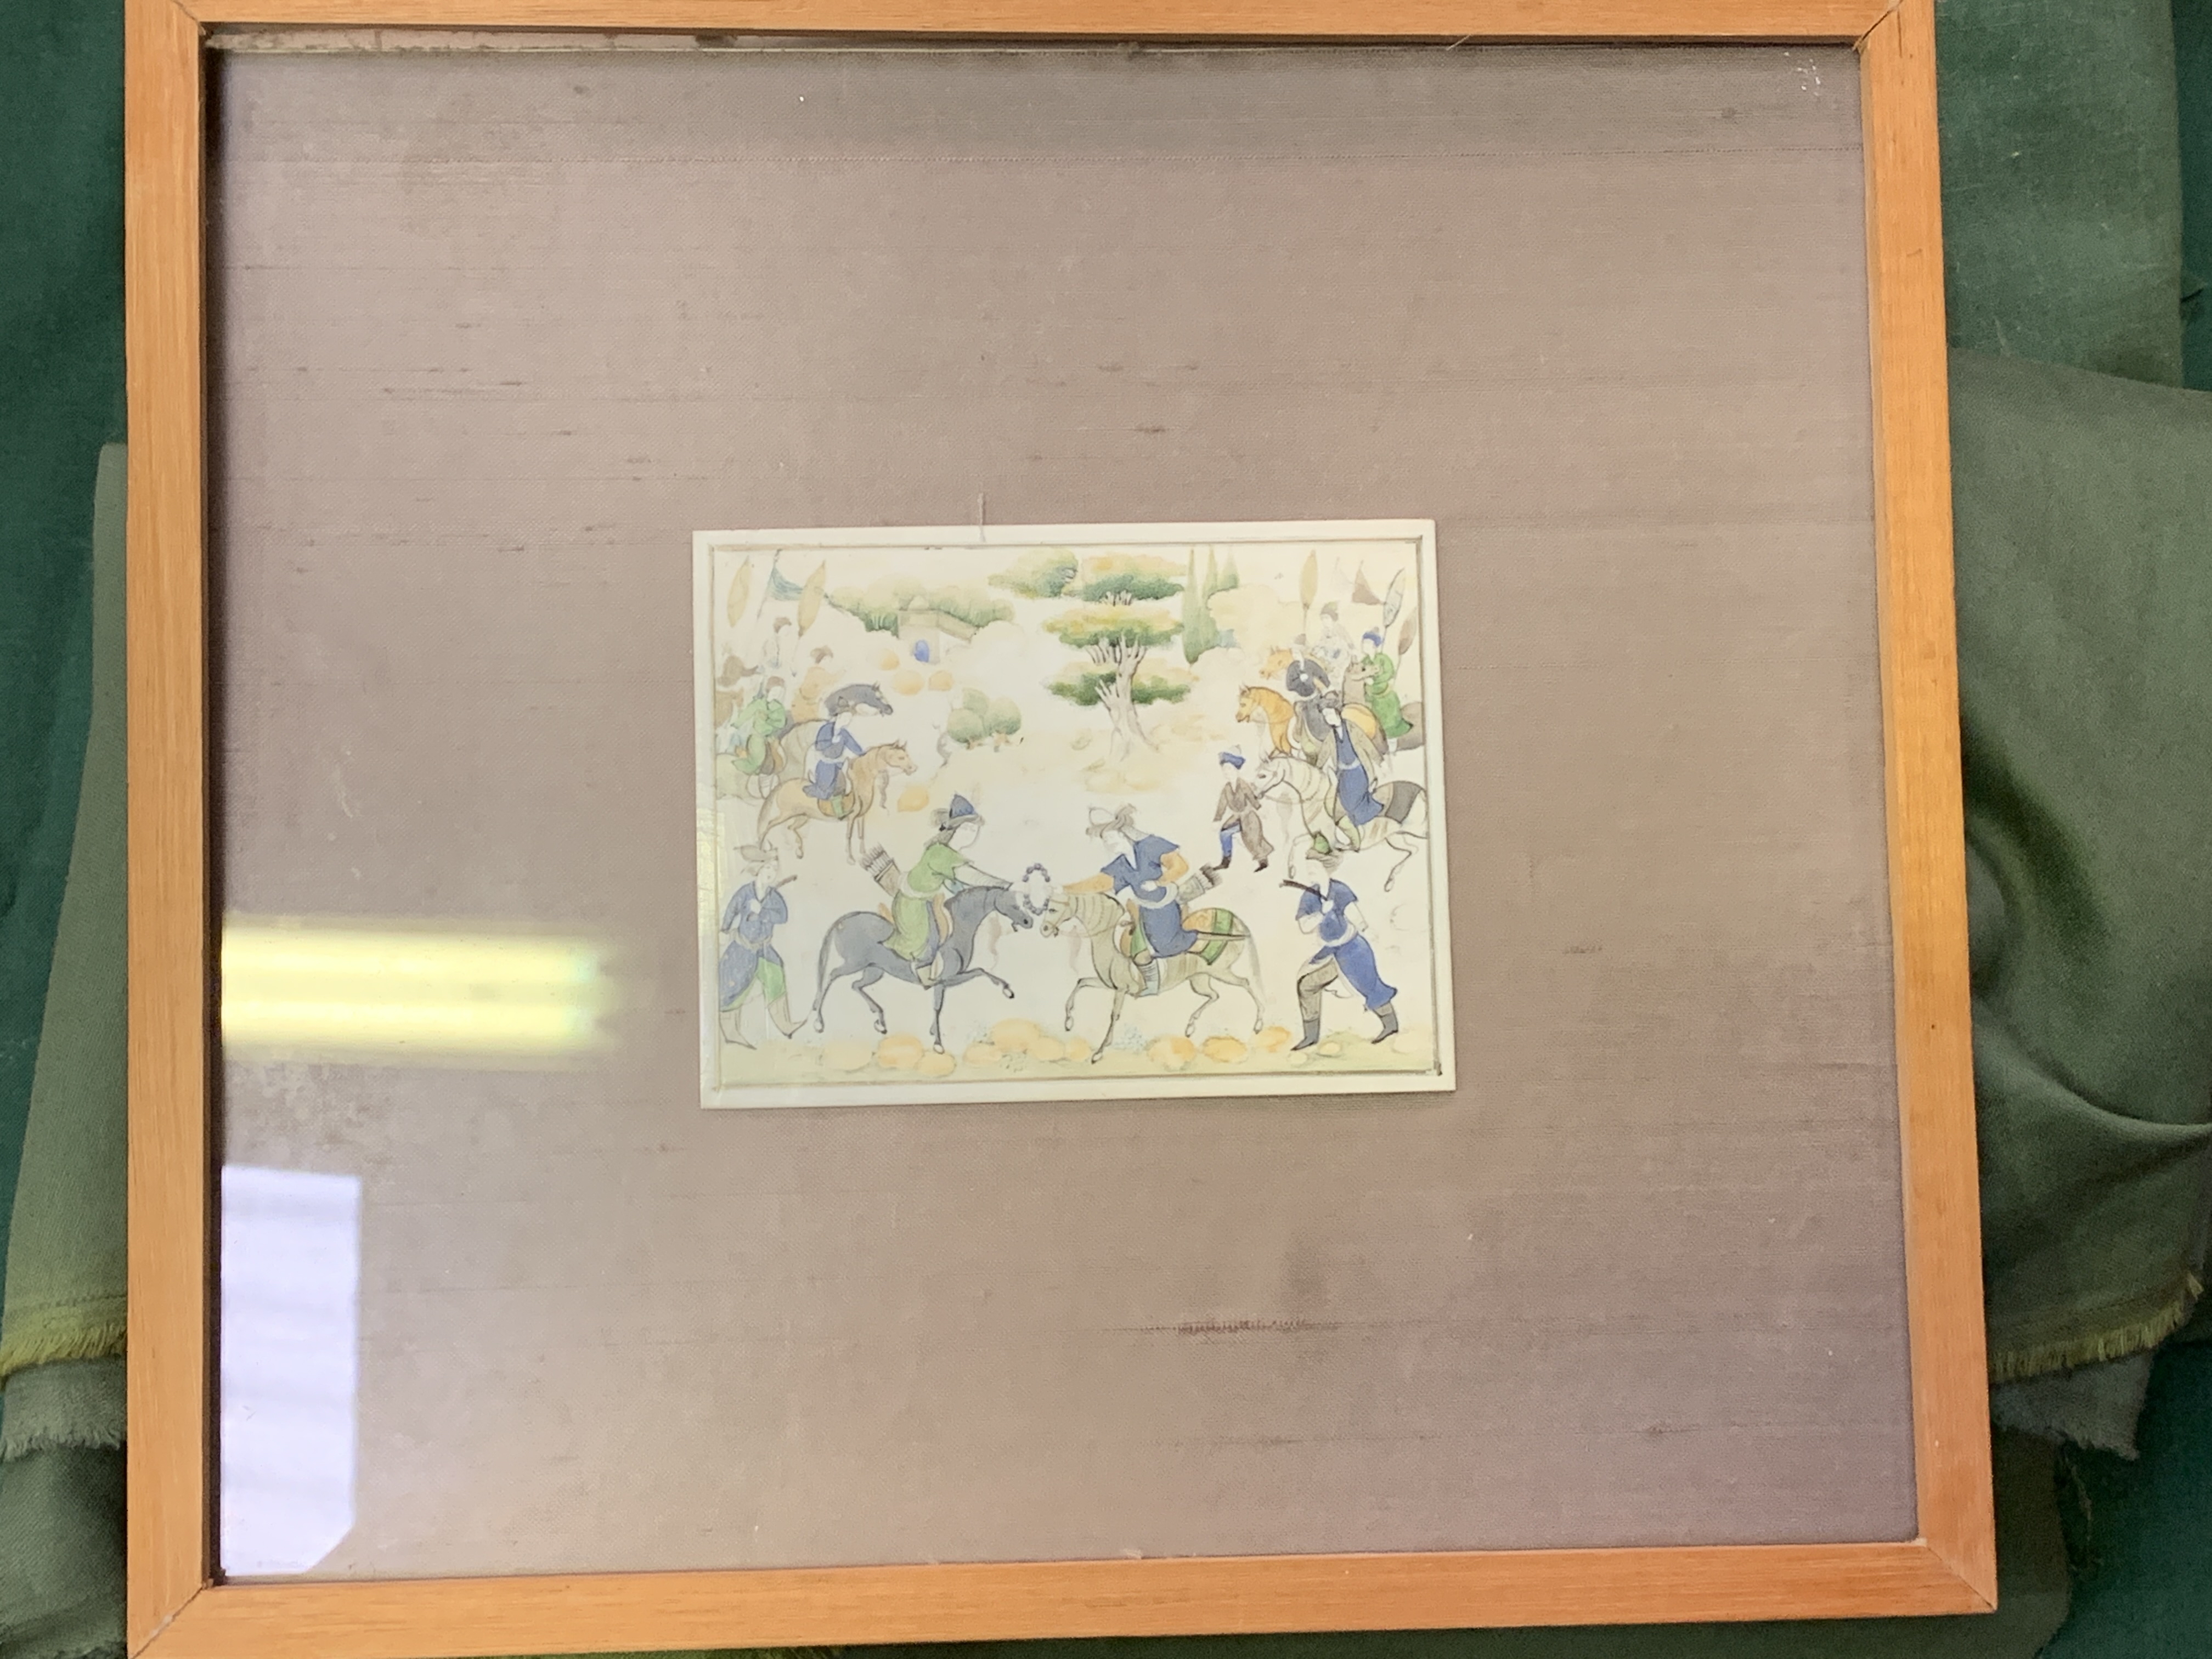 Framed and glazed painting on ivorine of Middle Eastern warriors